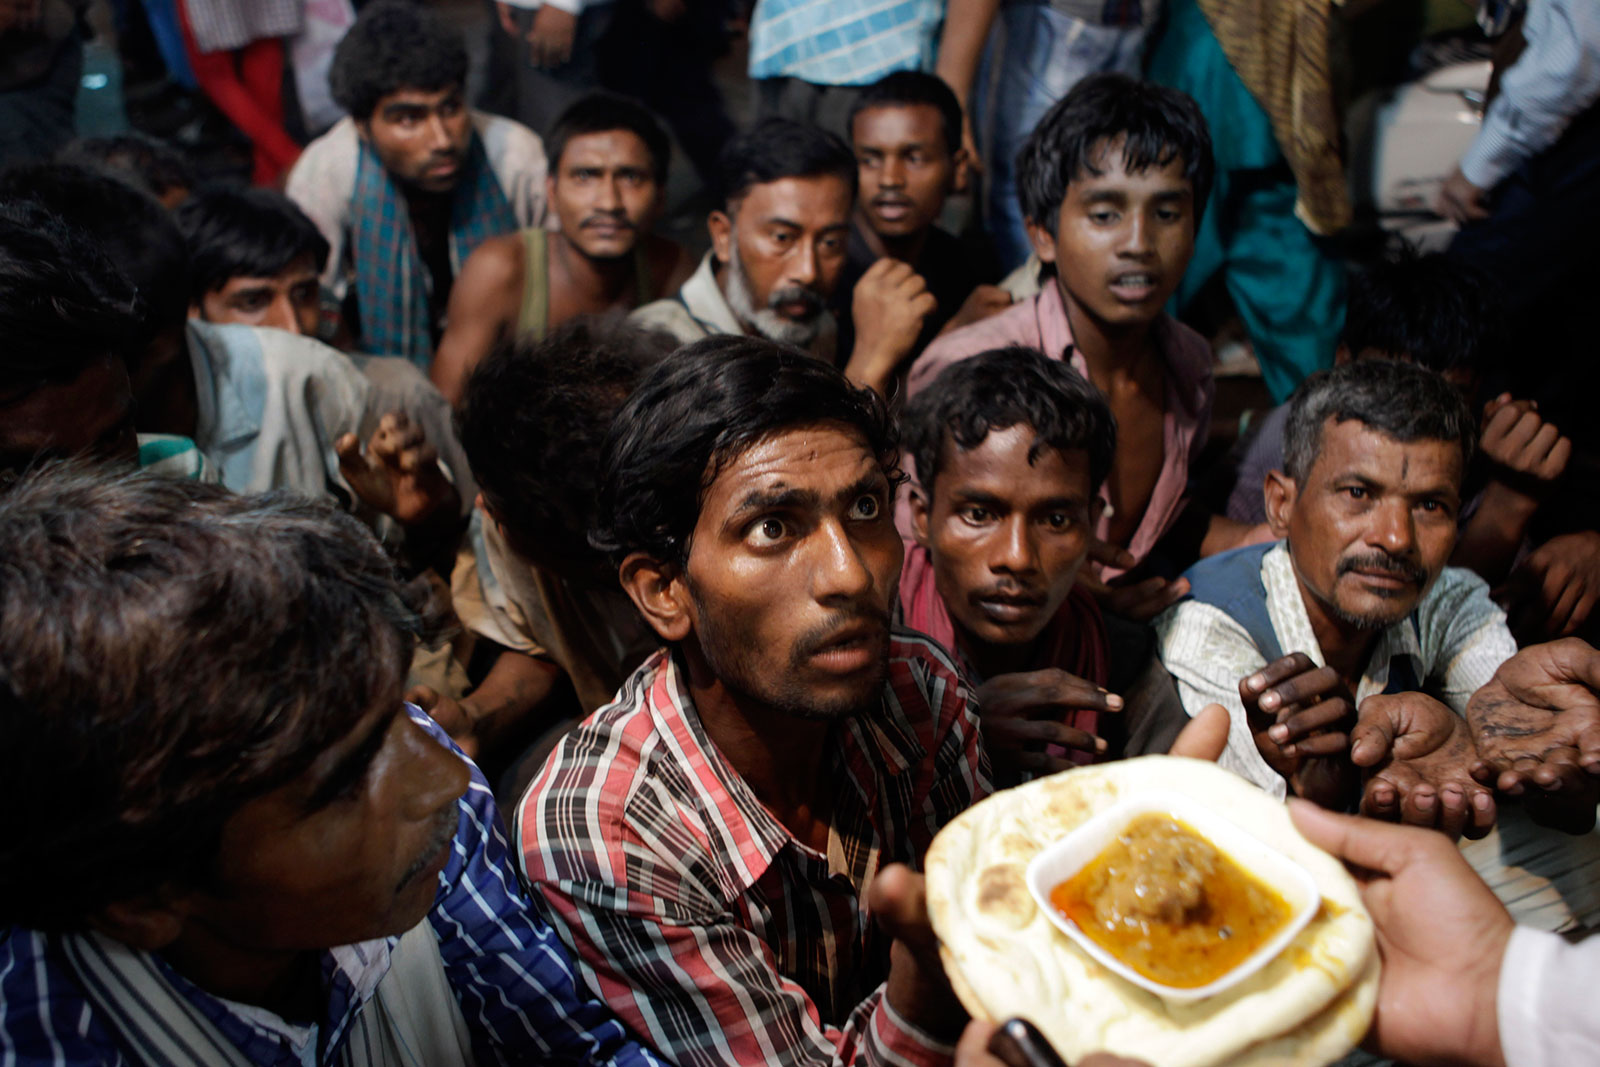 Indian homeless men wait to receive free food distributed outside a mosque ahead of Eid al-Fitr in New Delhi, India